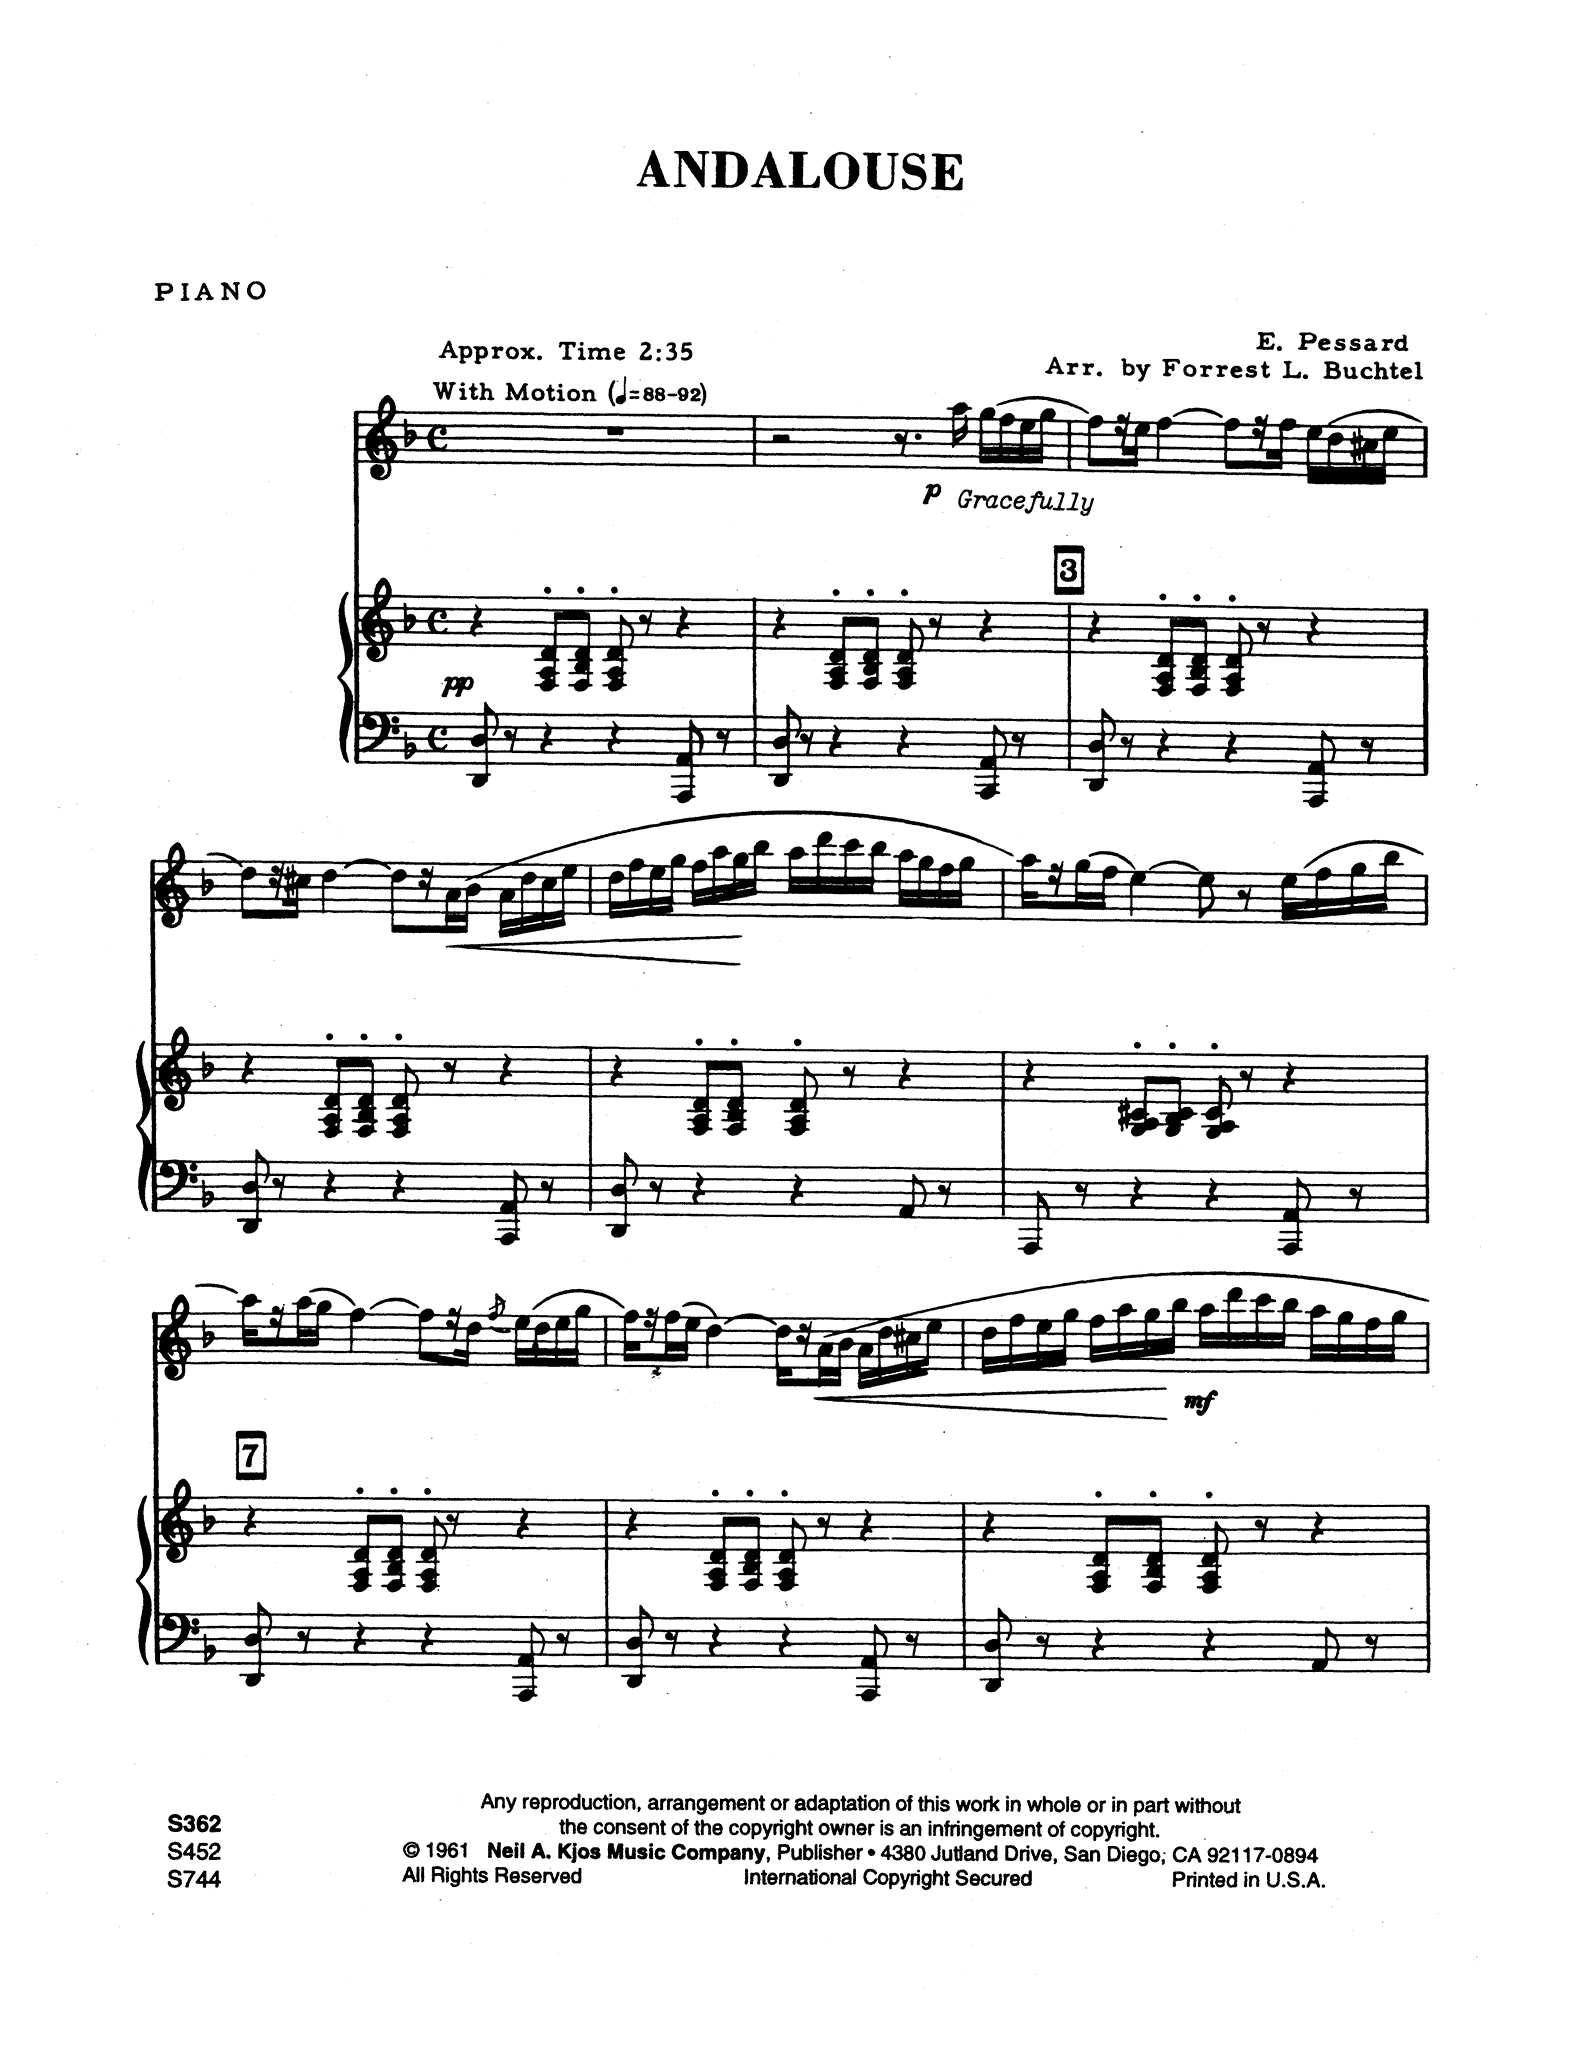 Andalouse, from 25 Pièces pour piano, Op. 20 Score